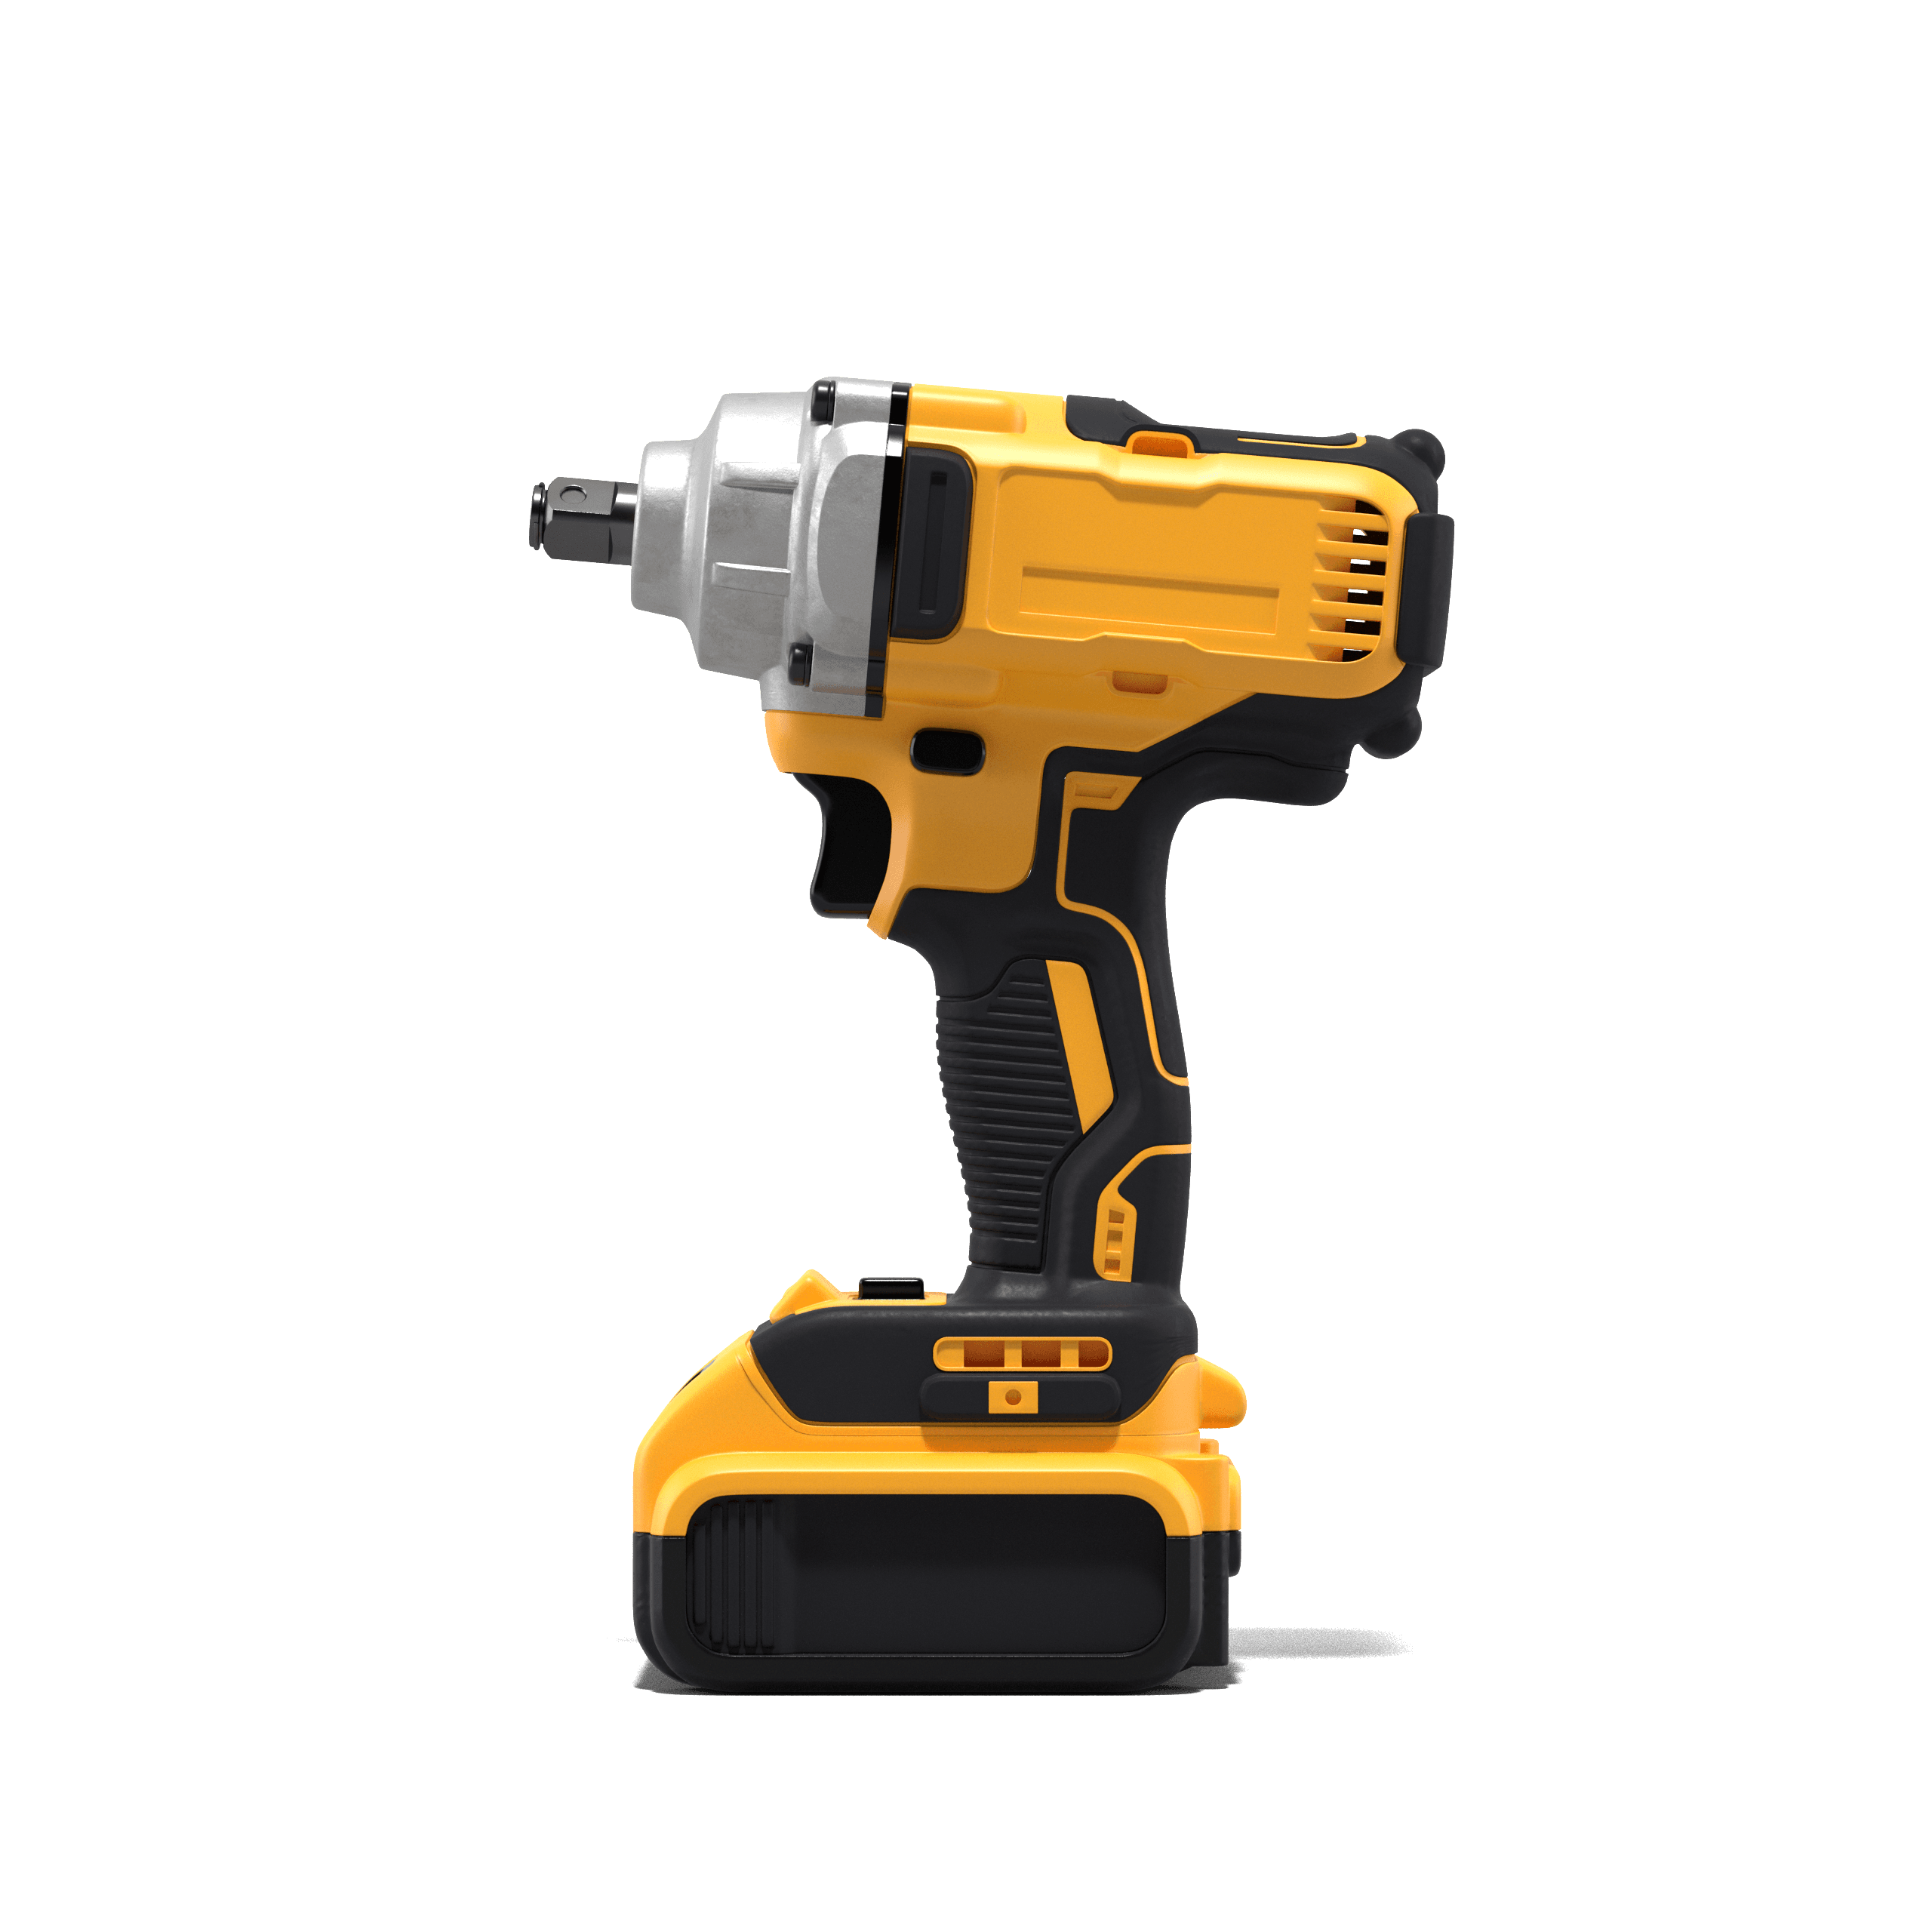 Field kit impact wrench